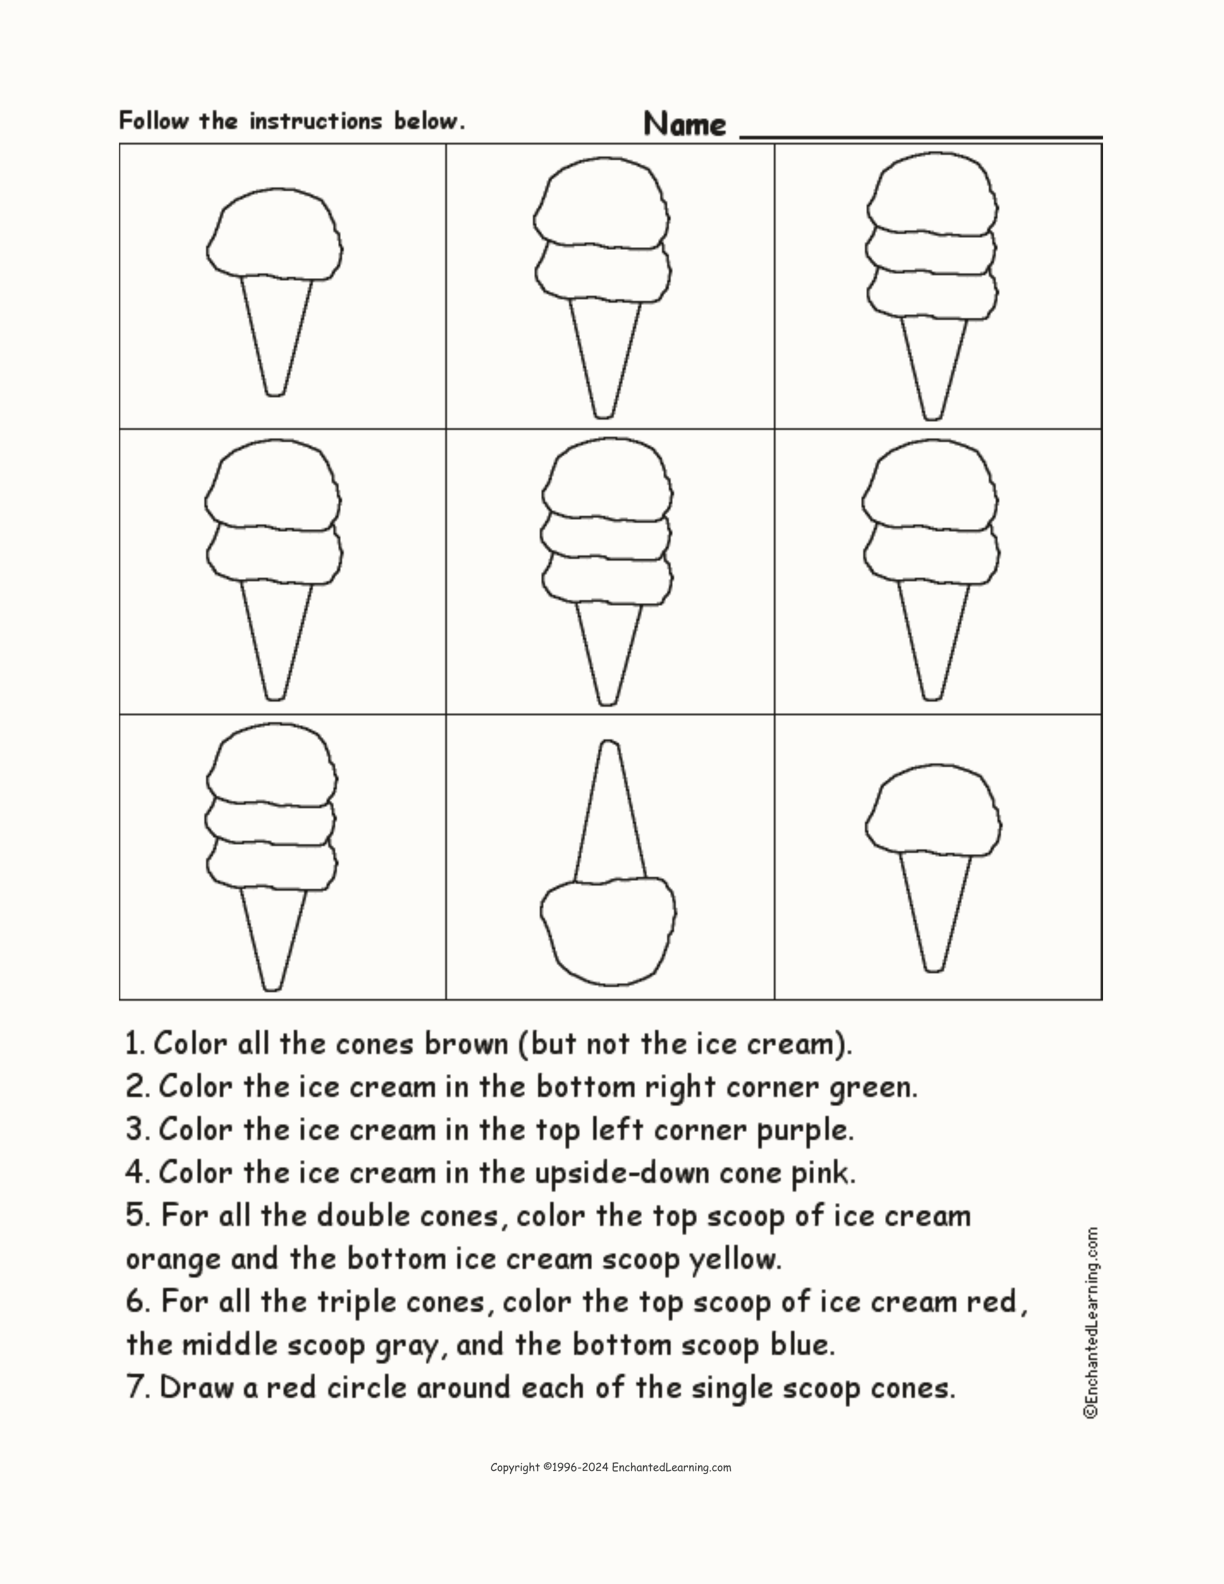 ice-cream-cones-follow-the-instructions-enchanted-learning